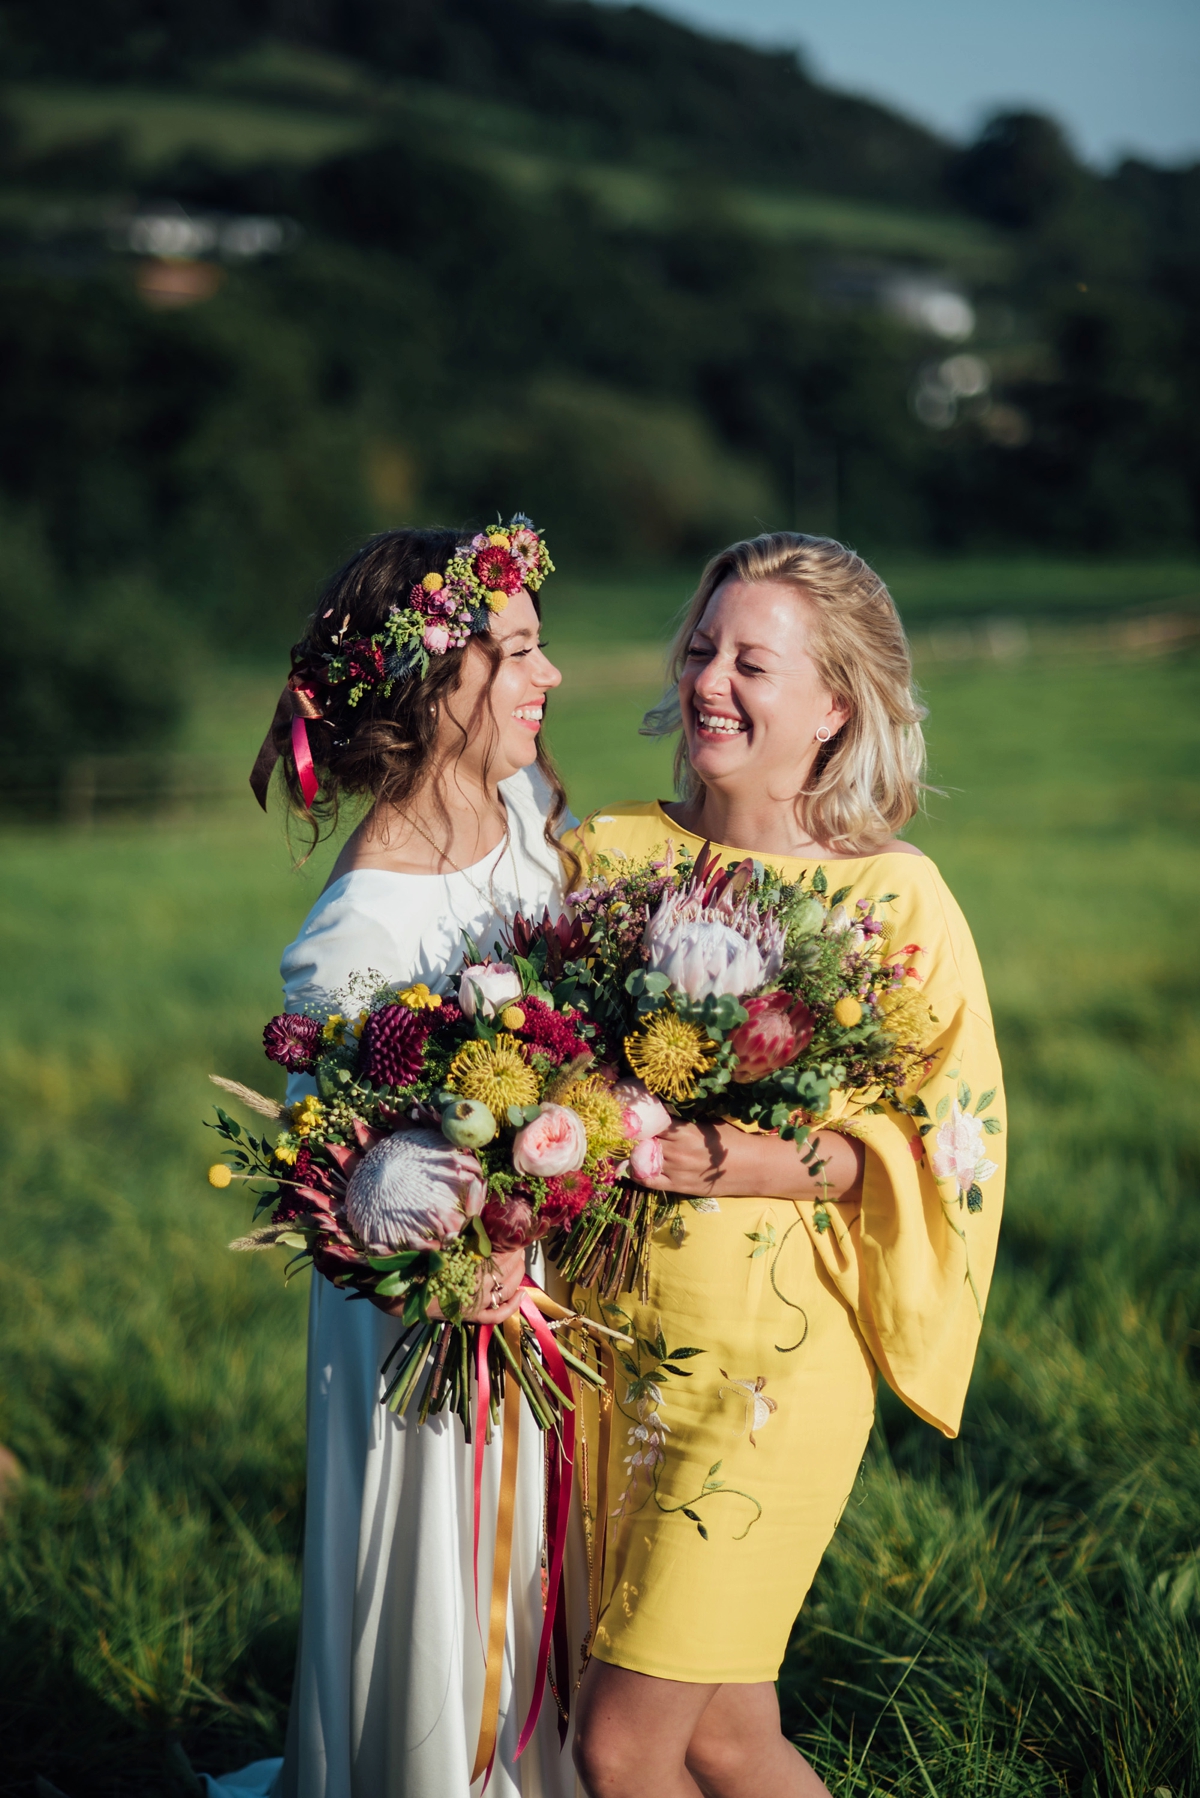 45 A handmade and natural outdoor wedding in Devon